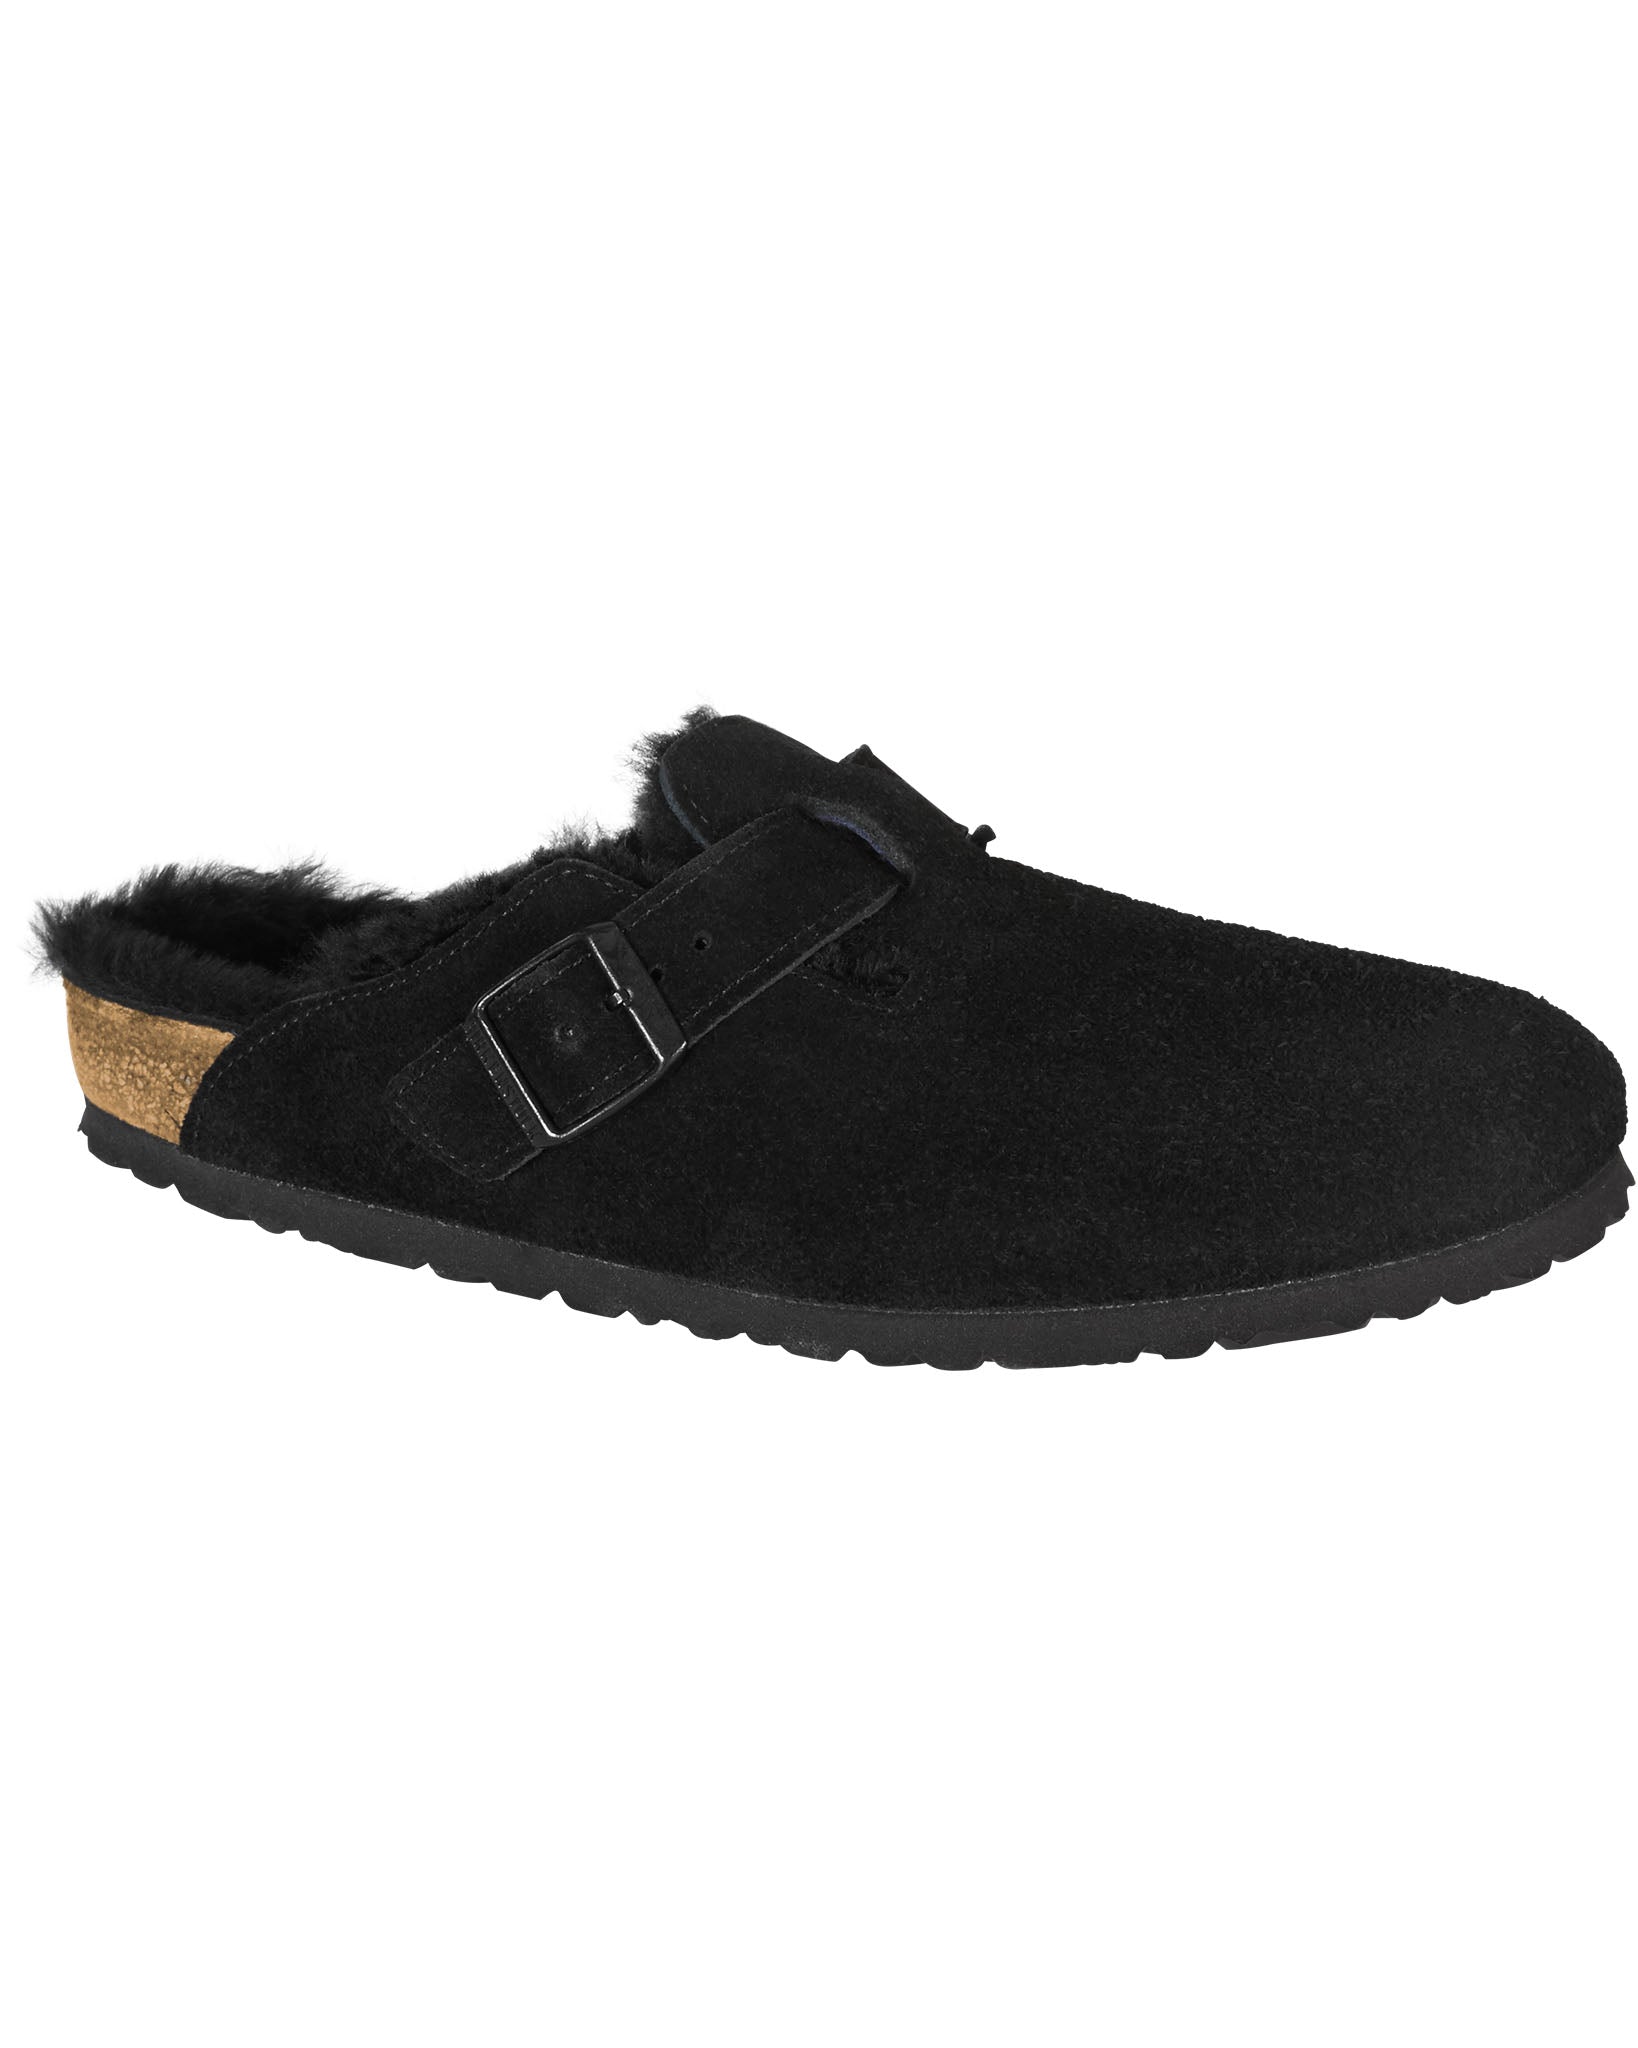 Boston Shearling Black Suede Leather Clogs